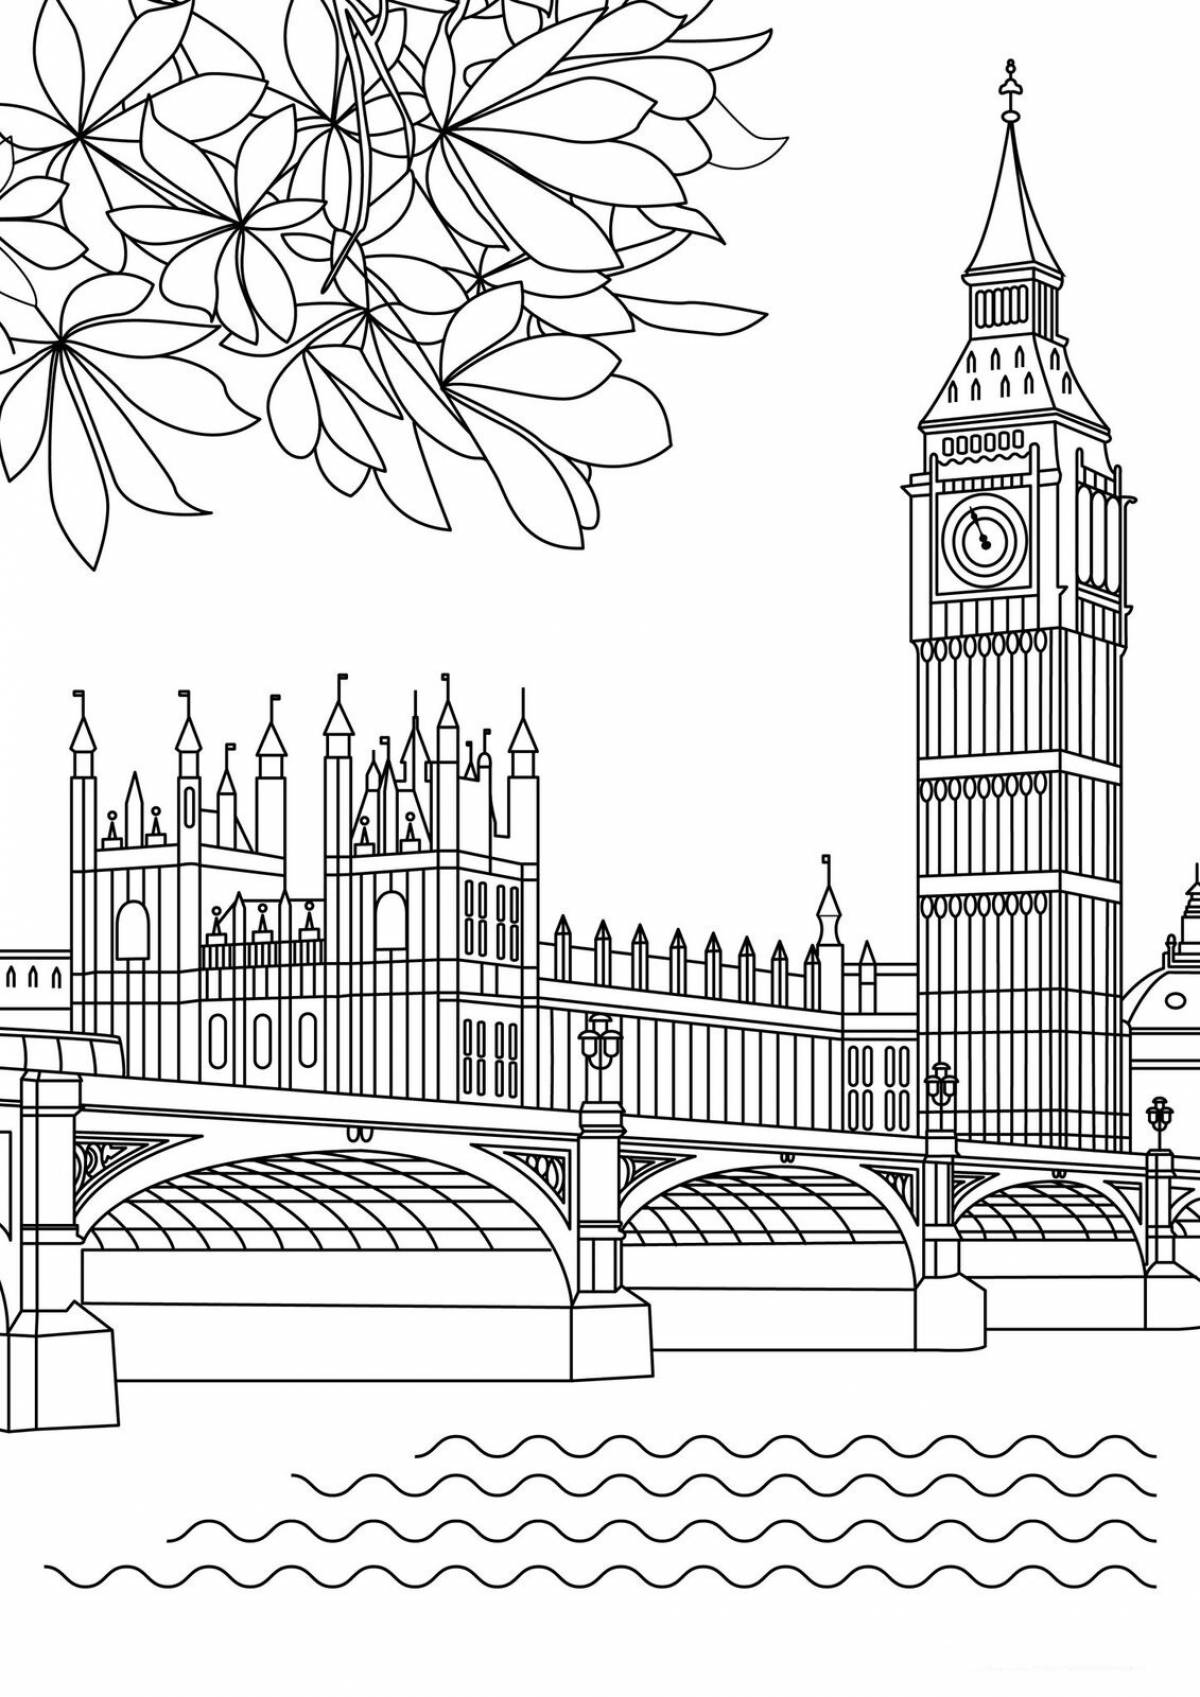 Animated london coloring book for kids